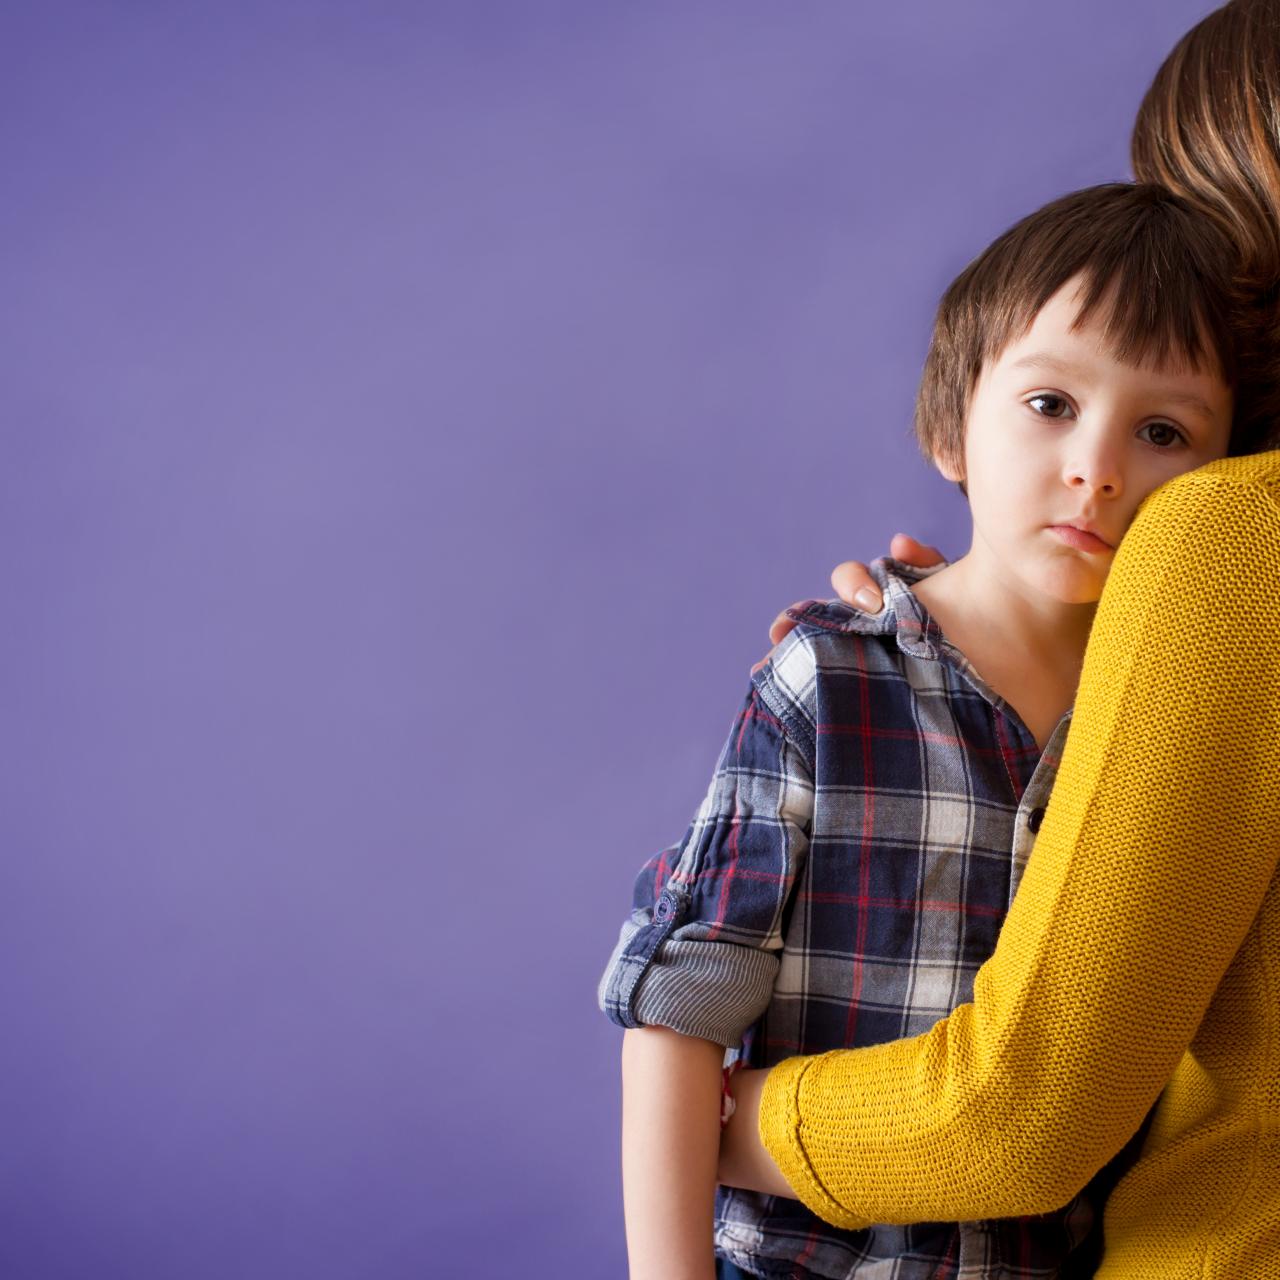 Why You Shouldn't Force Your Child to Hug, Parenting